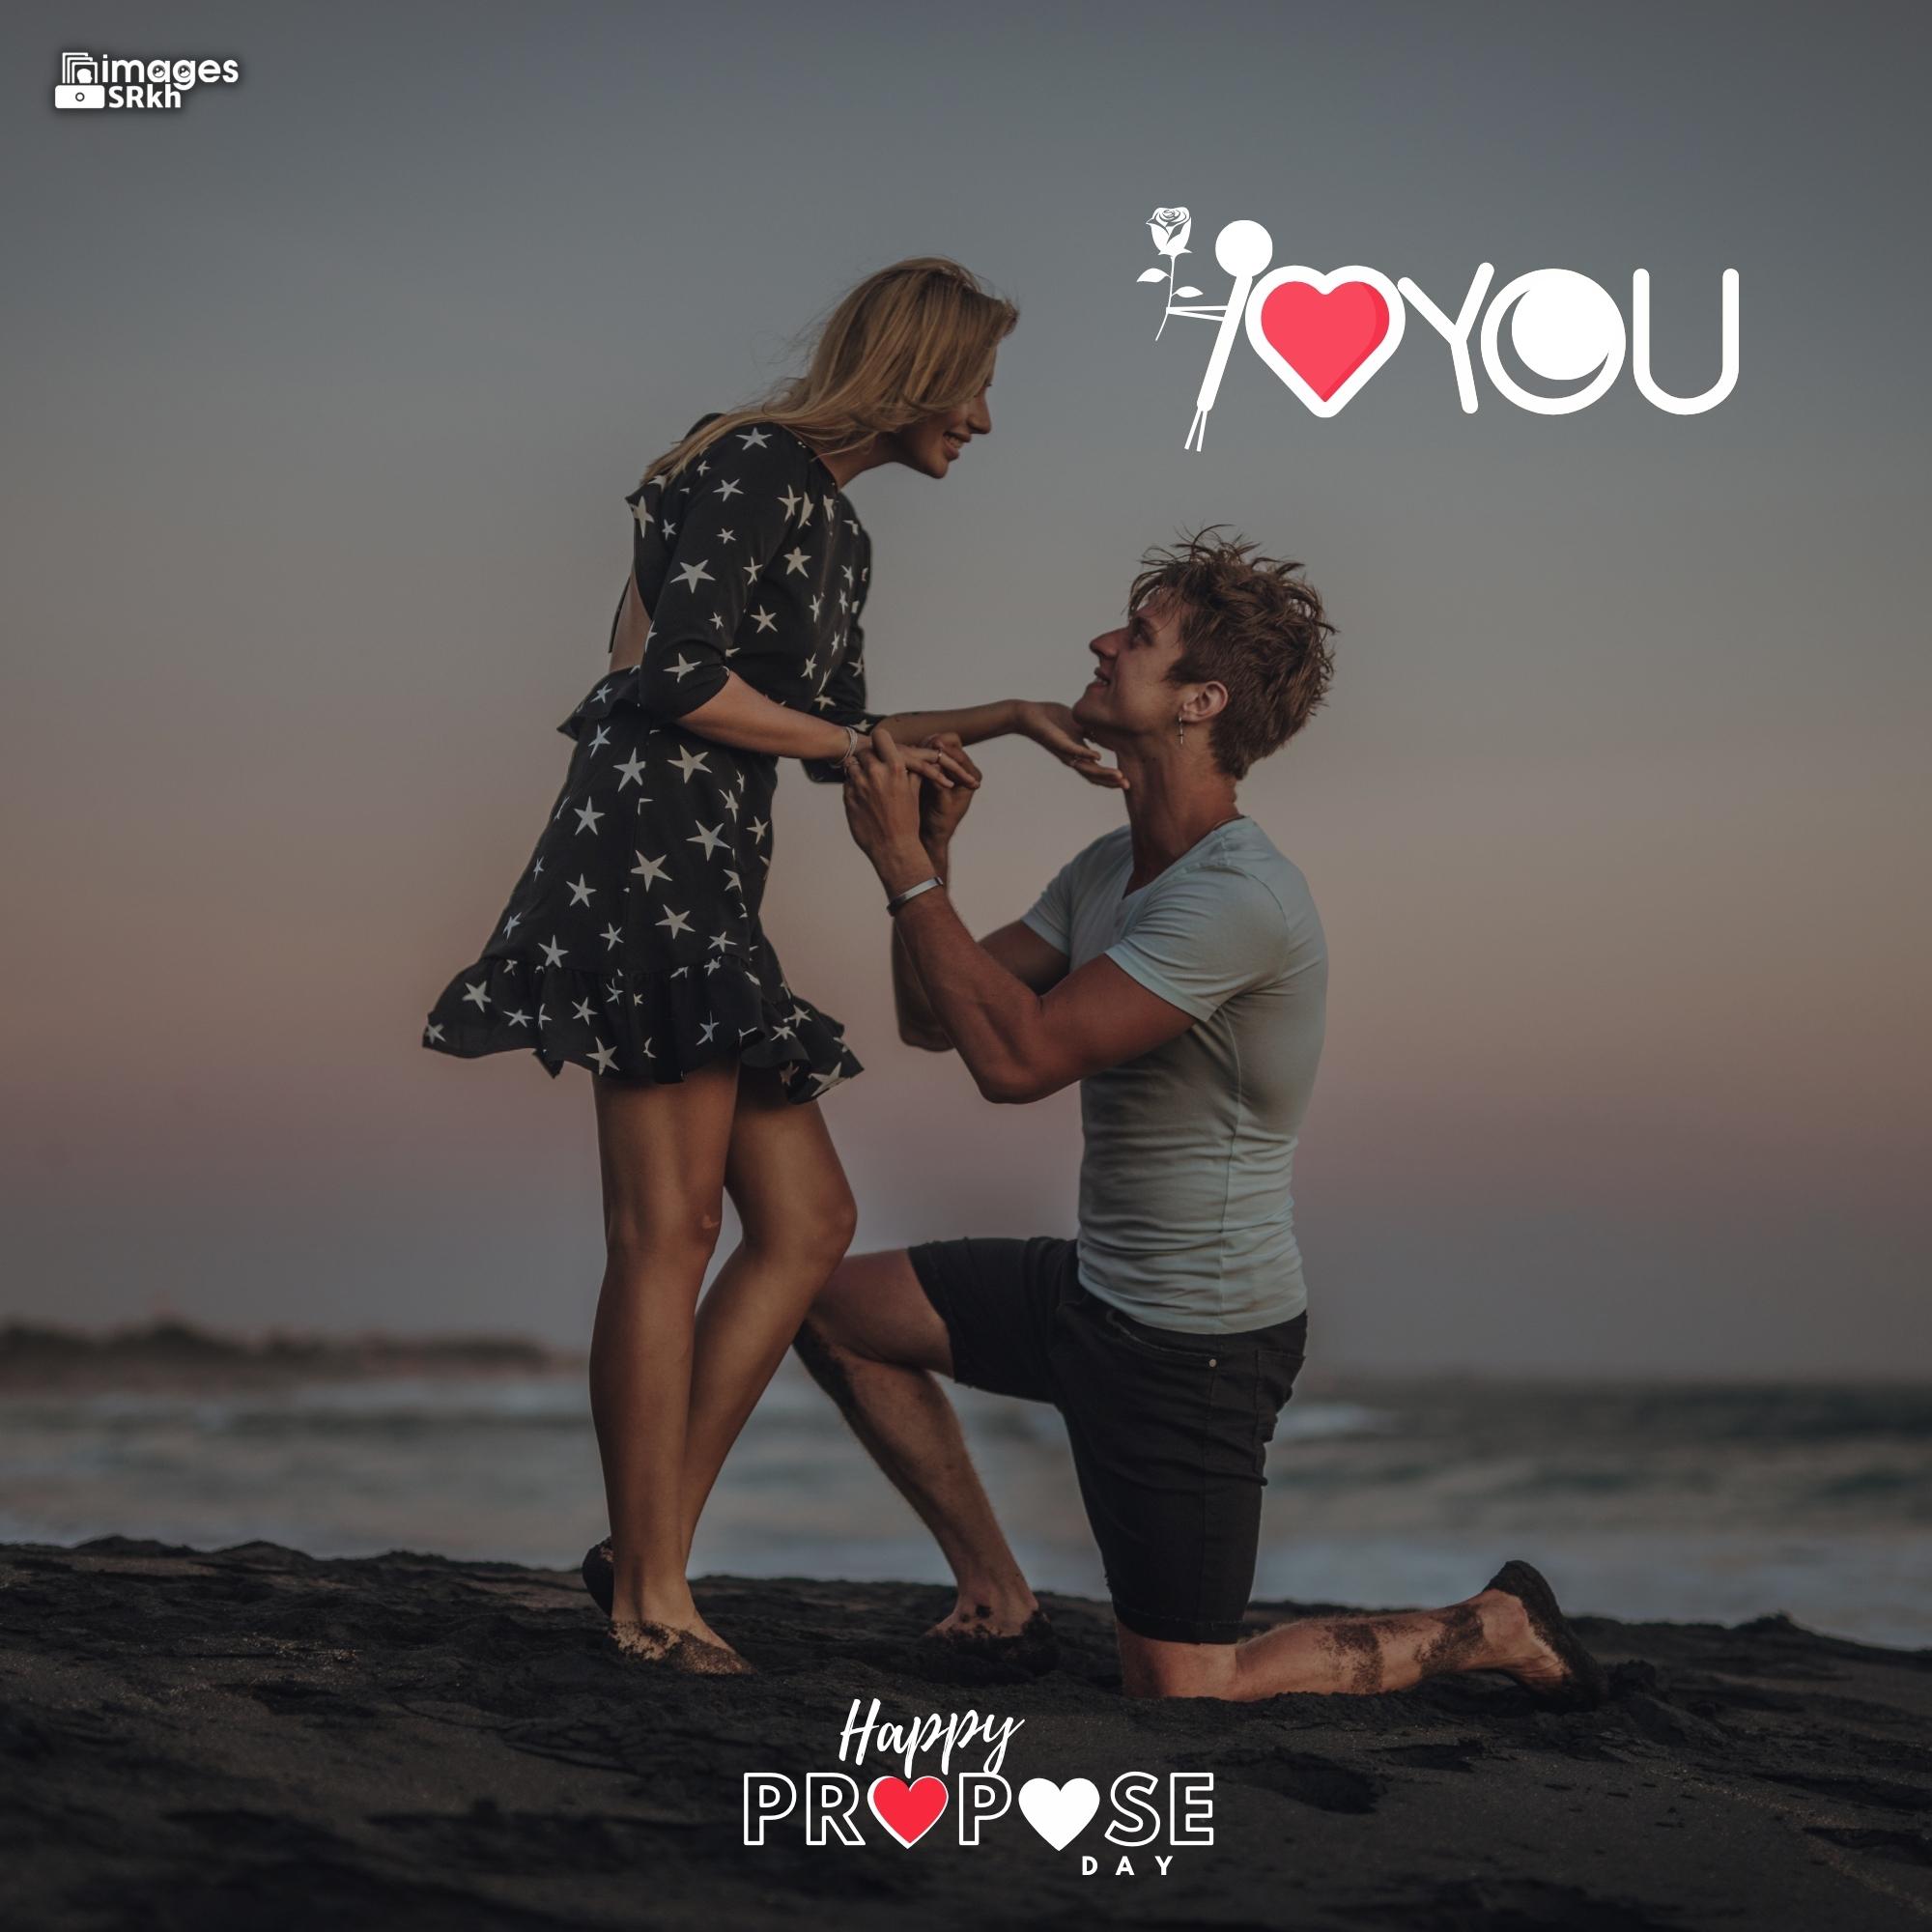 Happy Propose Day Images | 340 | I LOVE YOU